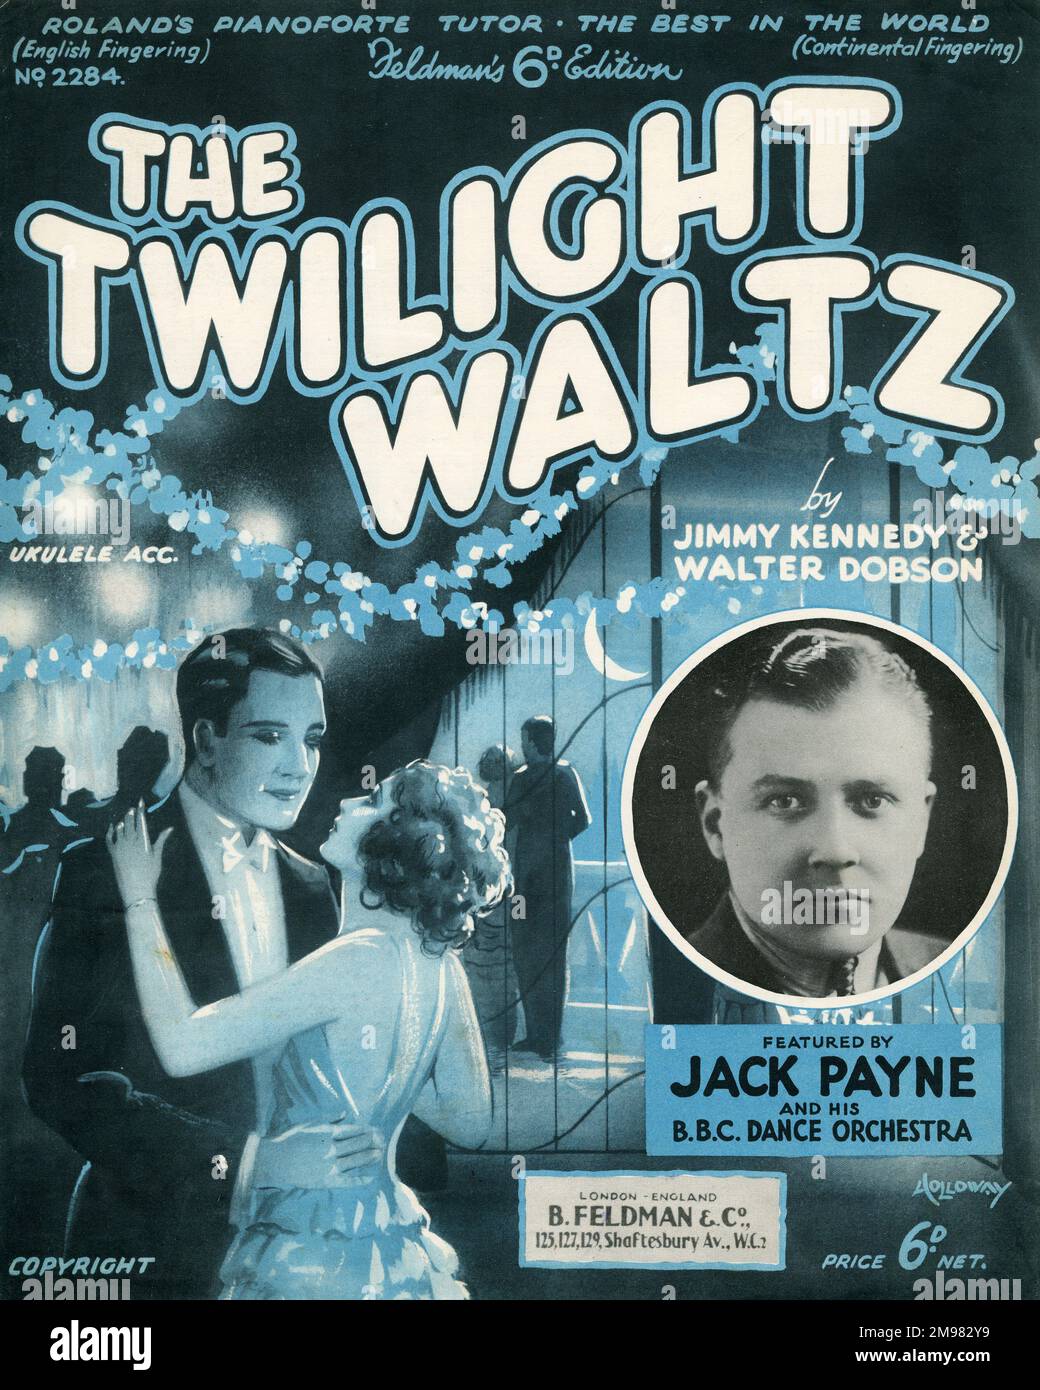 Music cover, The Twilight Waltz, by Jimmy Kennedy and Walter Dobson, featured by Jack Payne and his BBC Dance Orchestra. Stock Photo